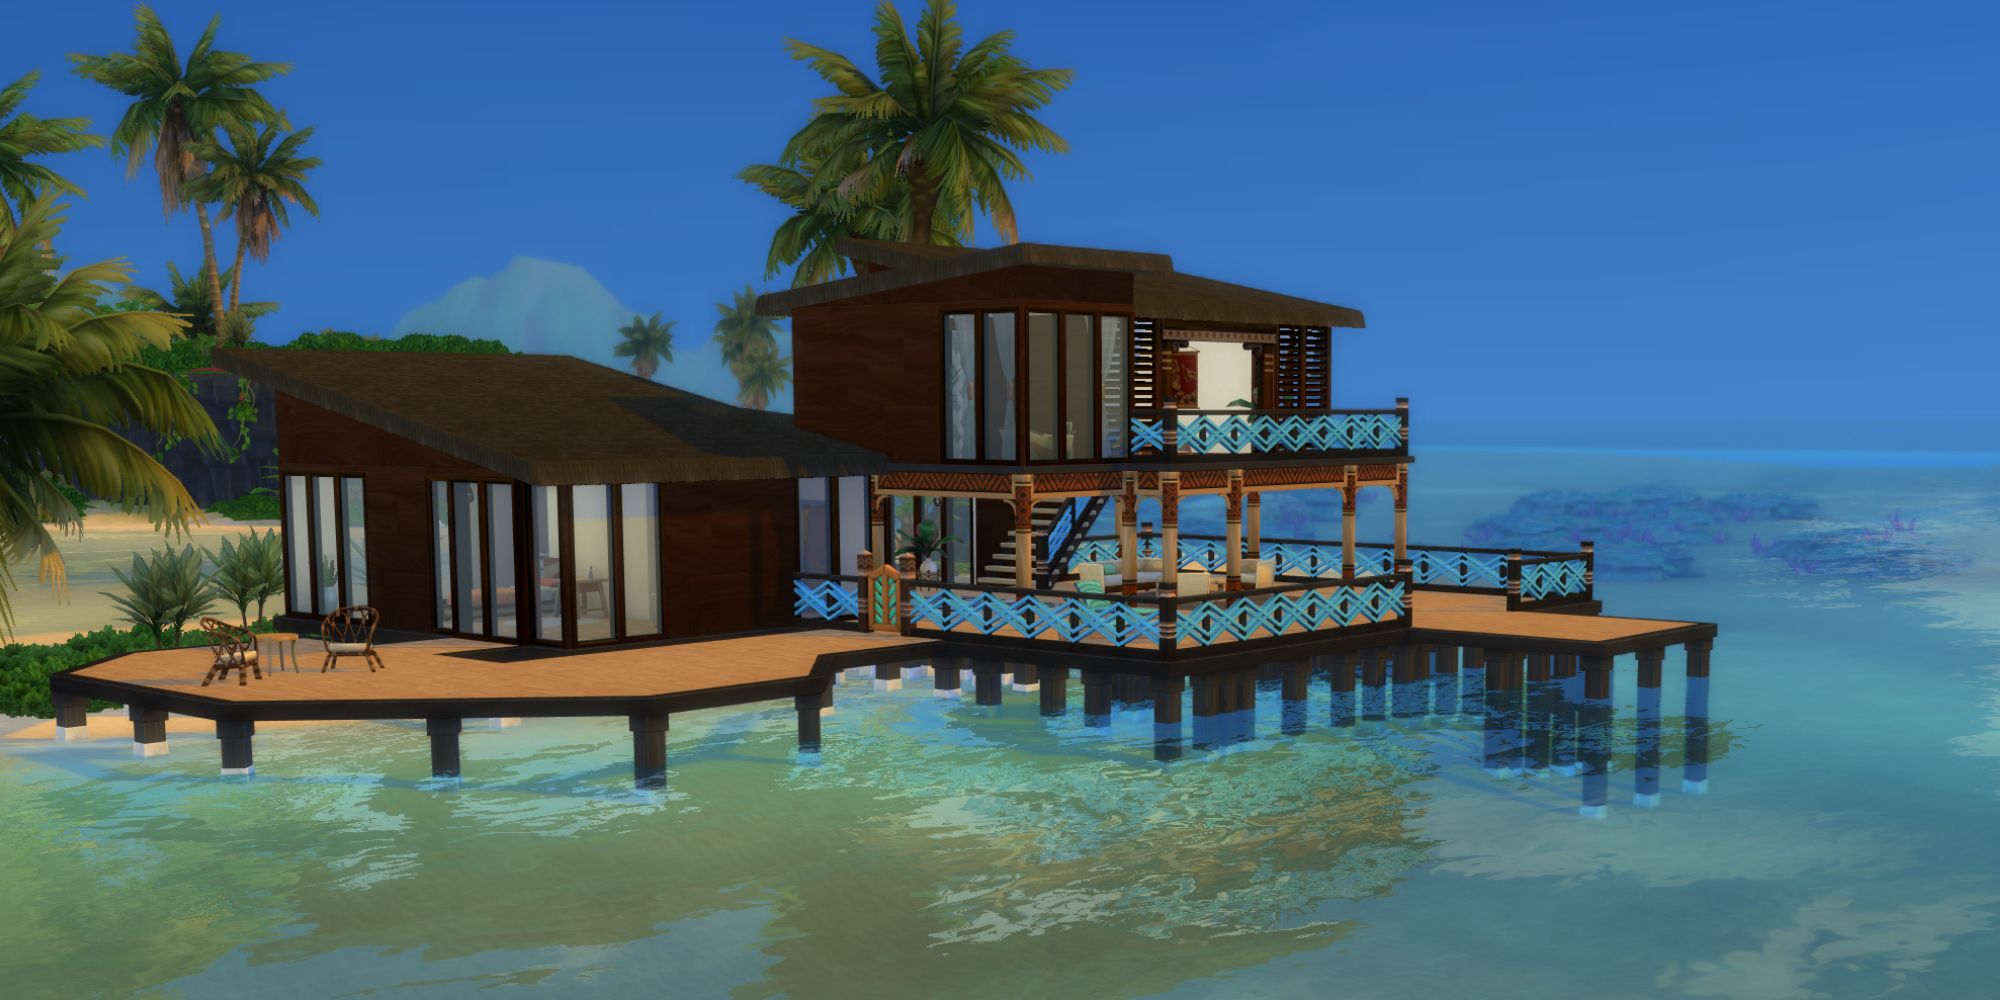 Sims 4 beach house in sulani